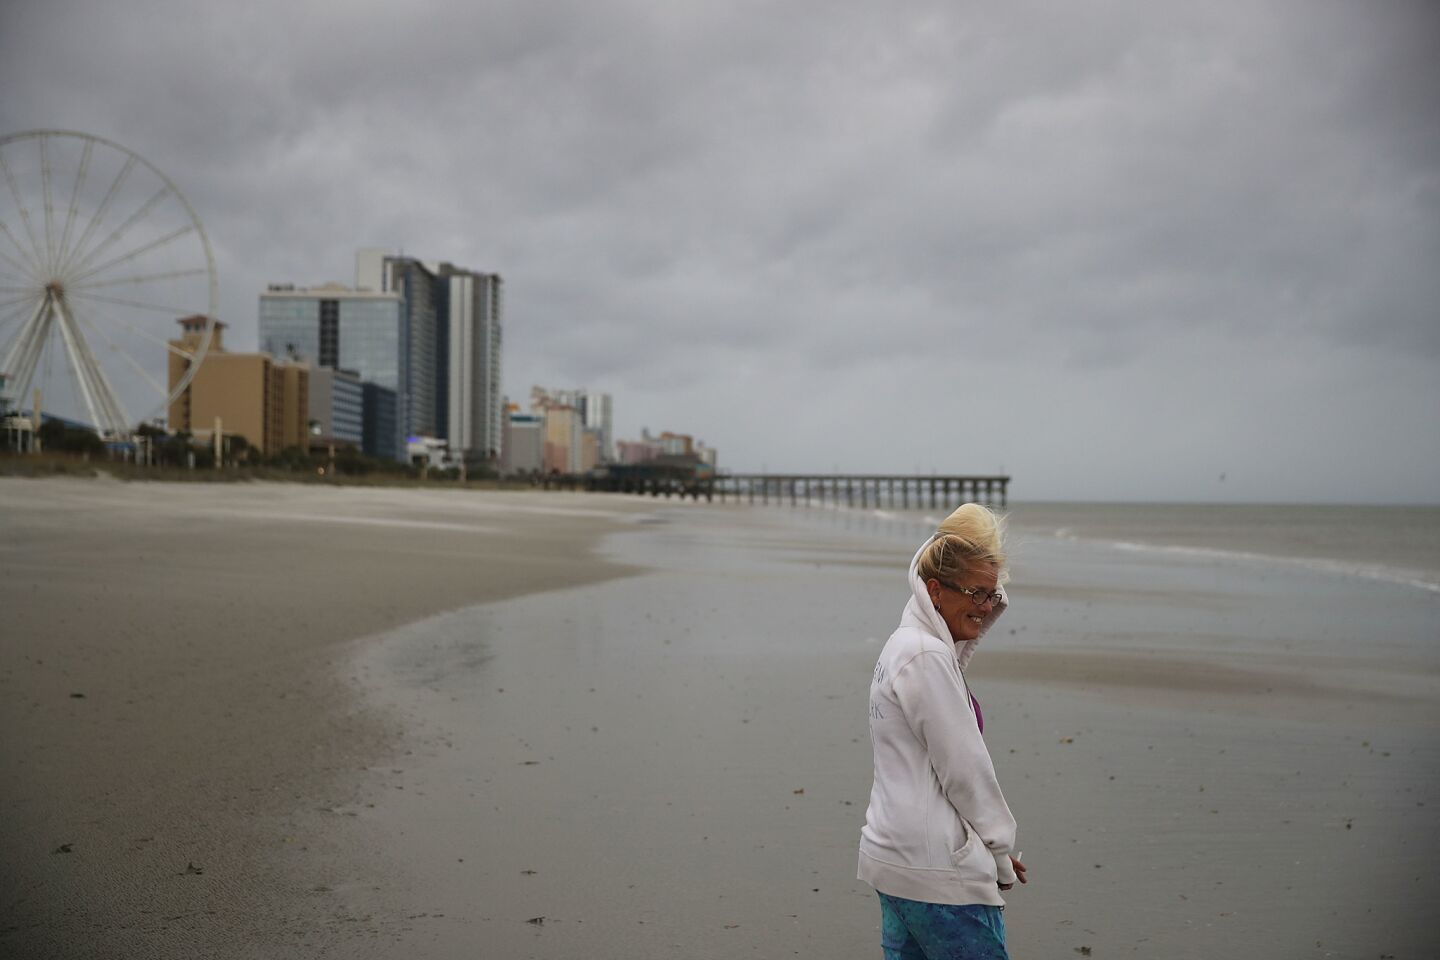 Linda Deem walks along the beach as winds from Hurricane Florence are felt in Myrtle Beach, S.C